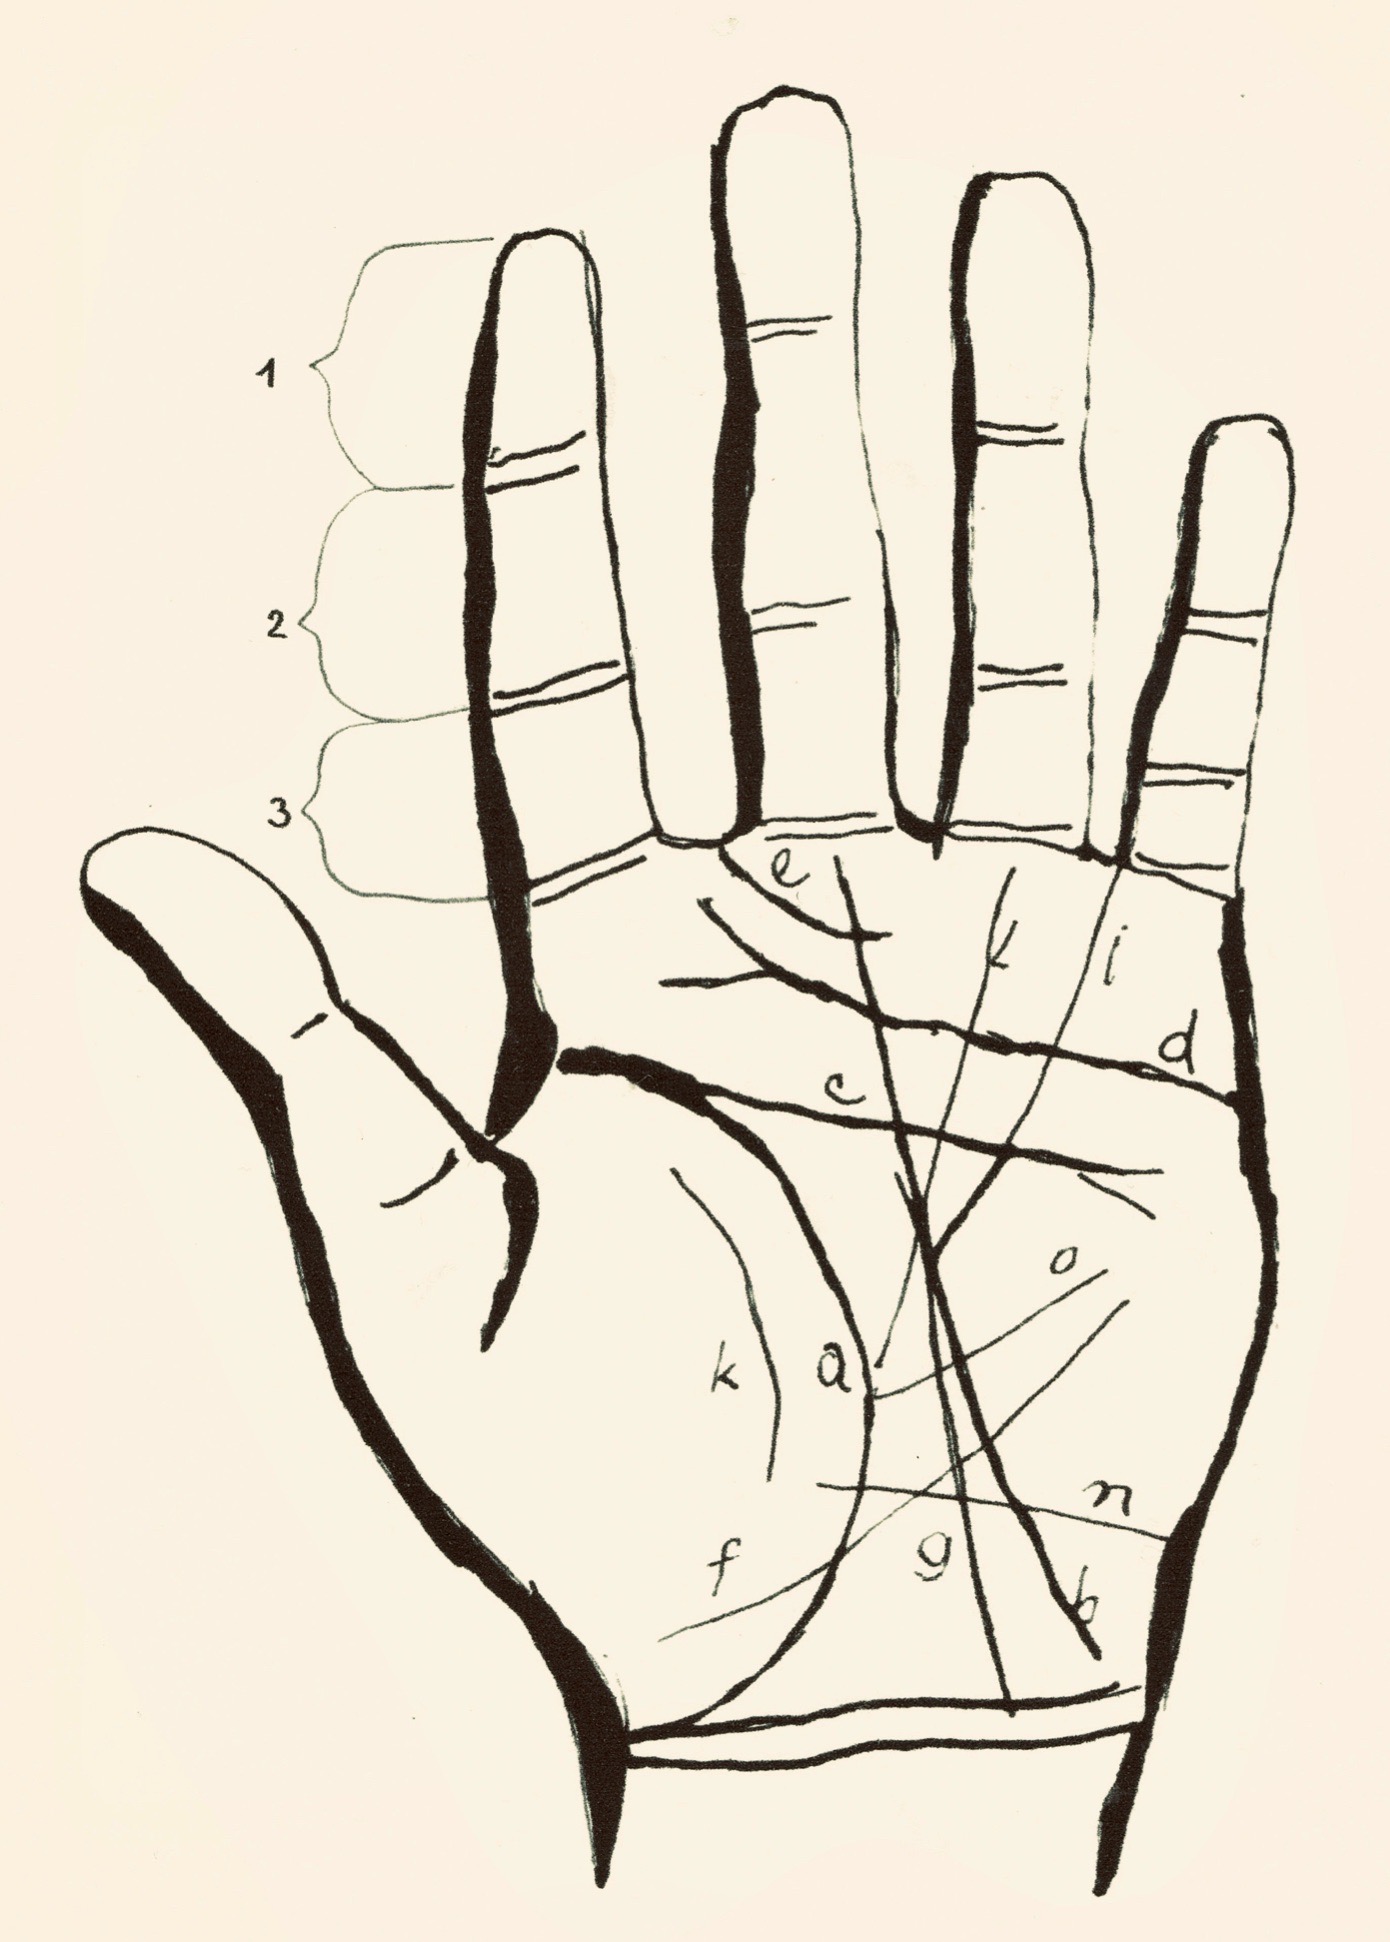 The Art of Western Astro-Palmistry